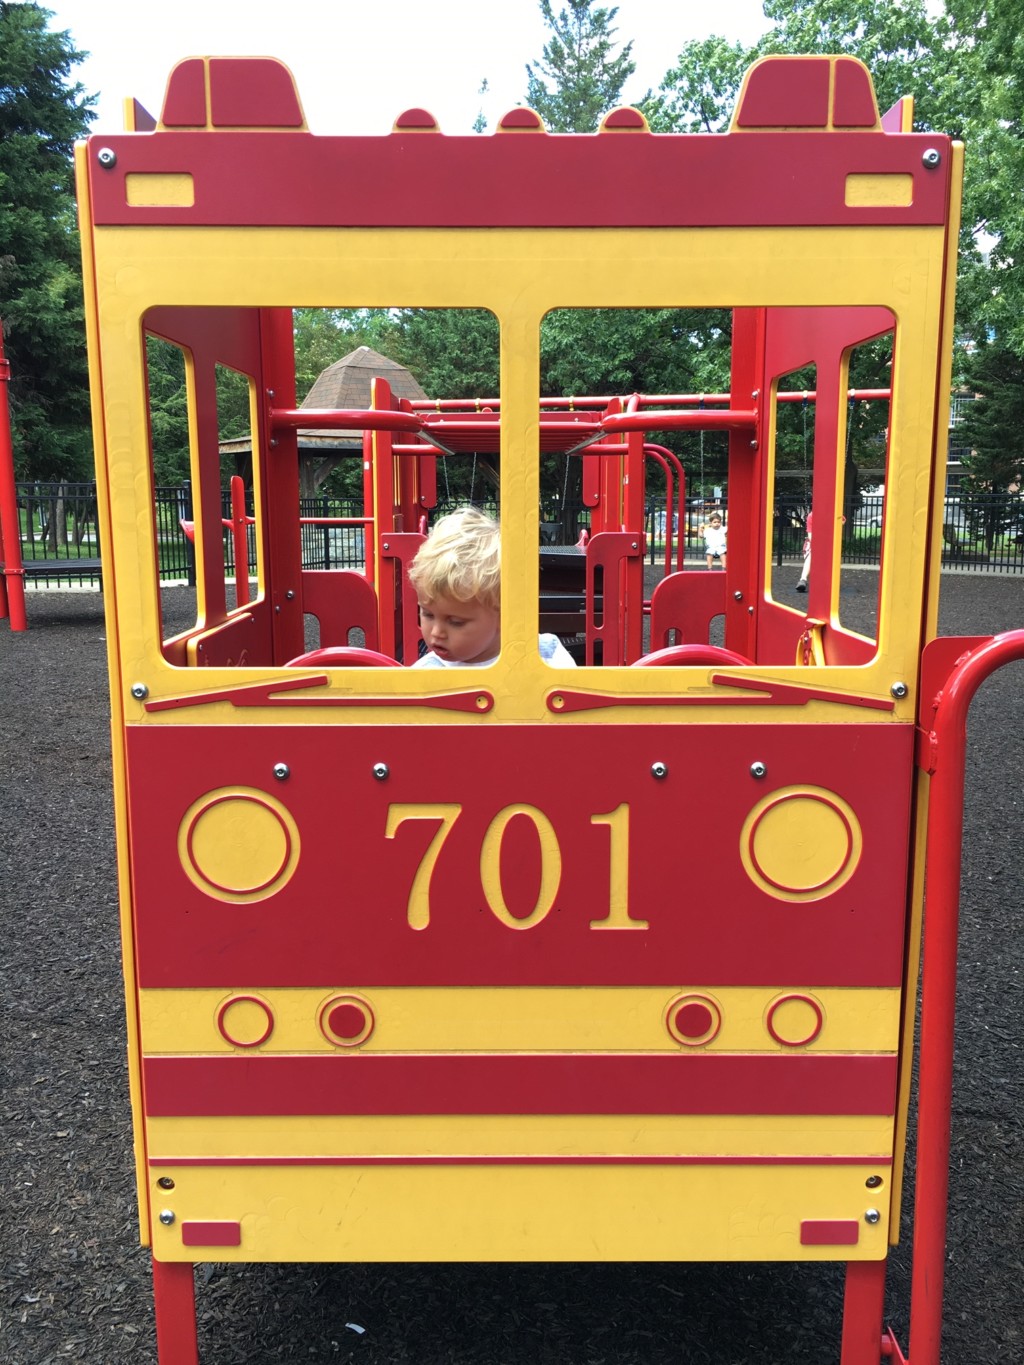 At a playground, a toddler sits behind the steering wheel of a large bright red and yellow fire engine.